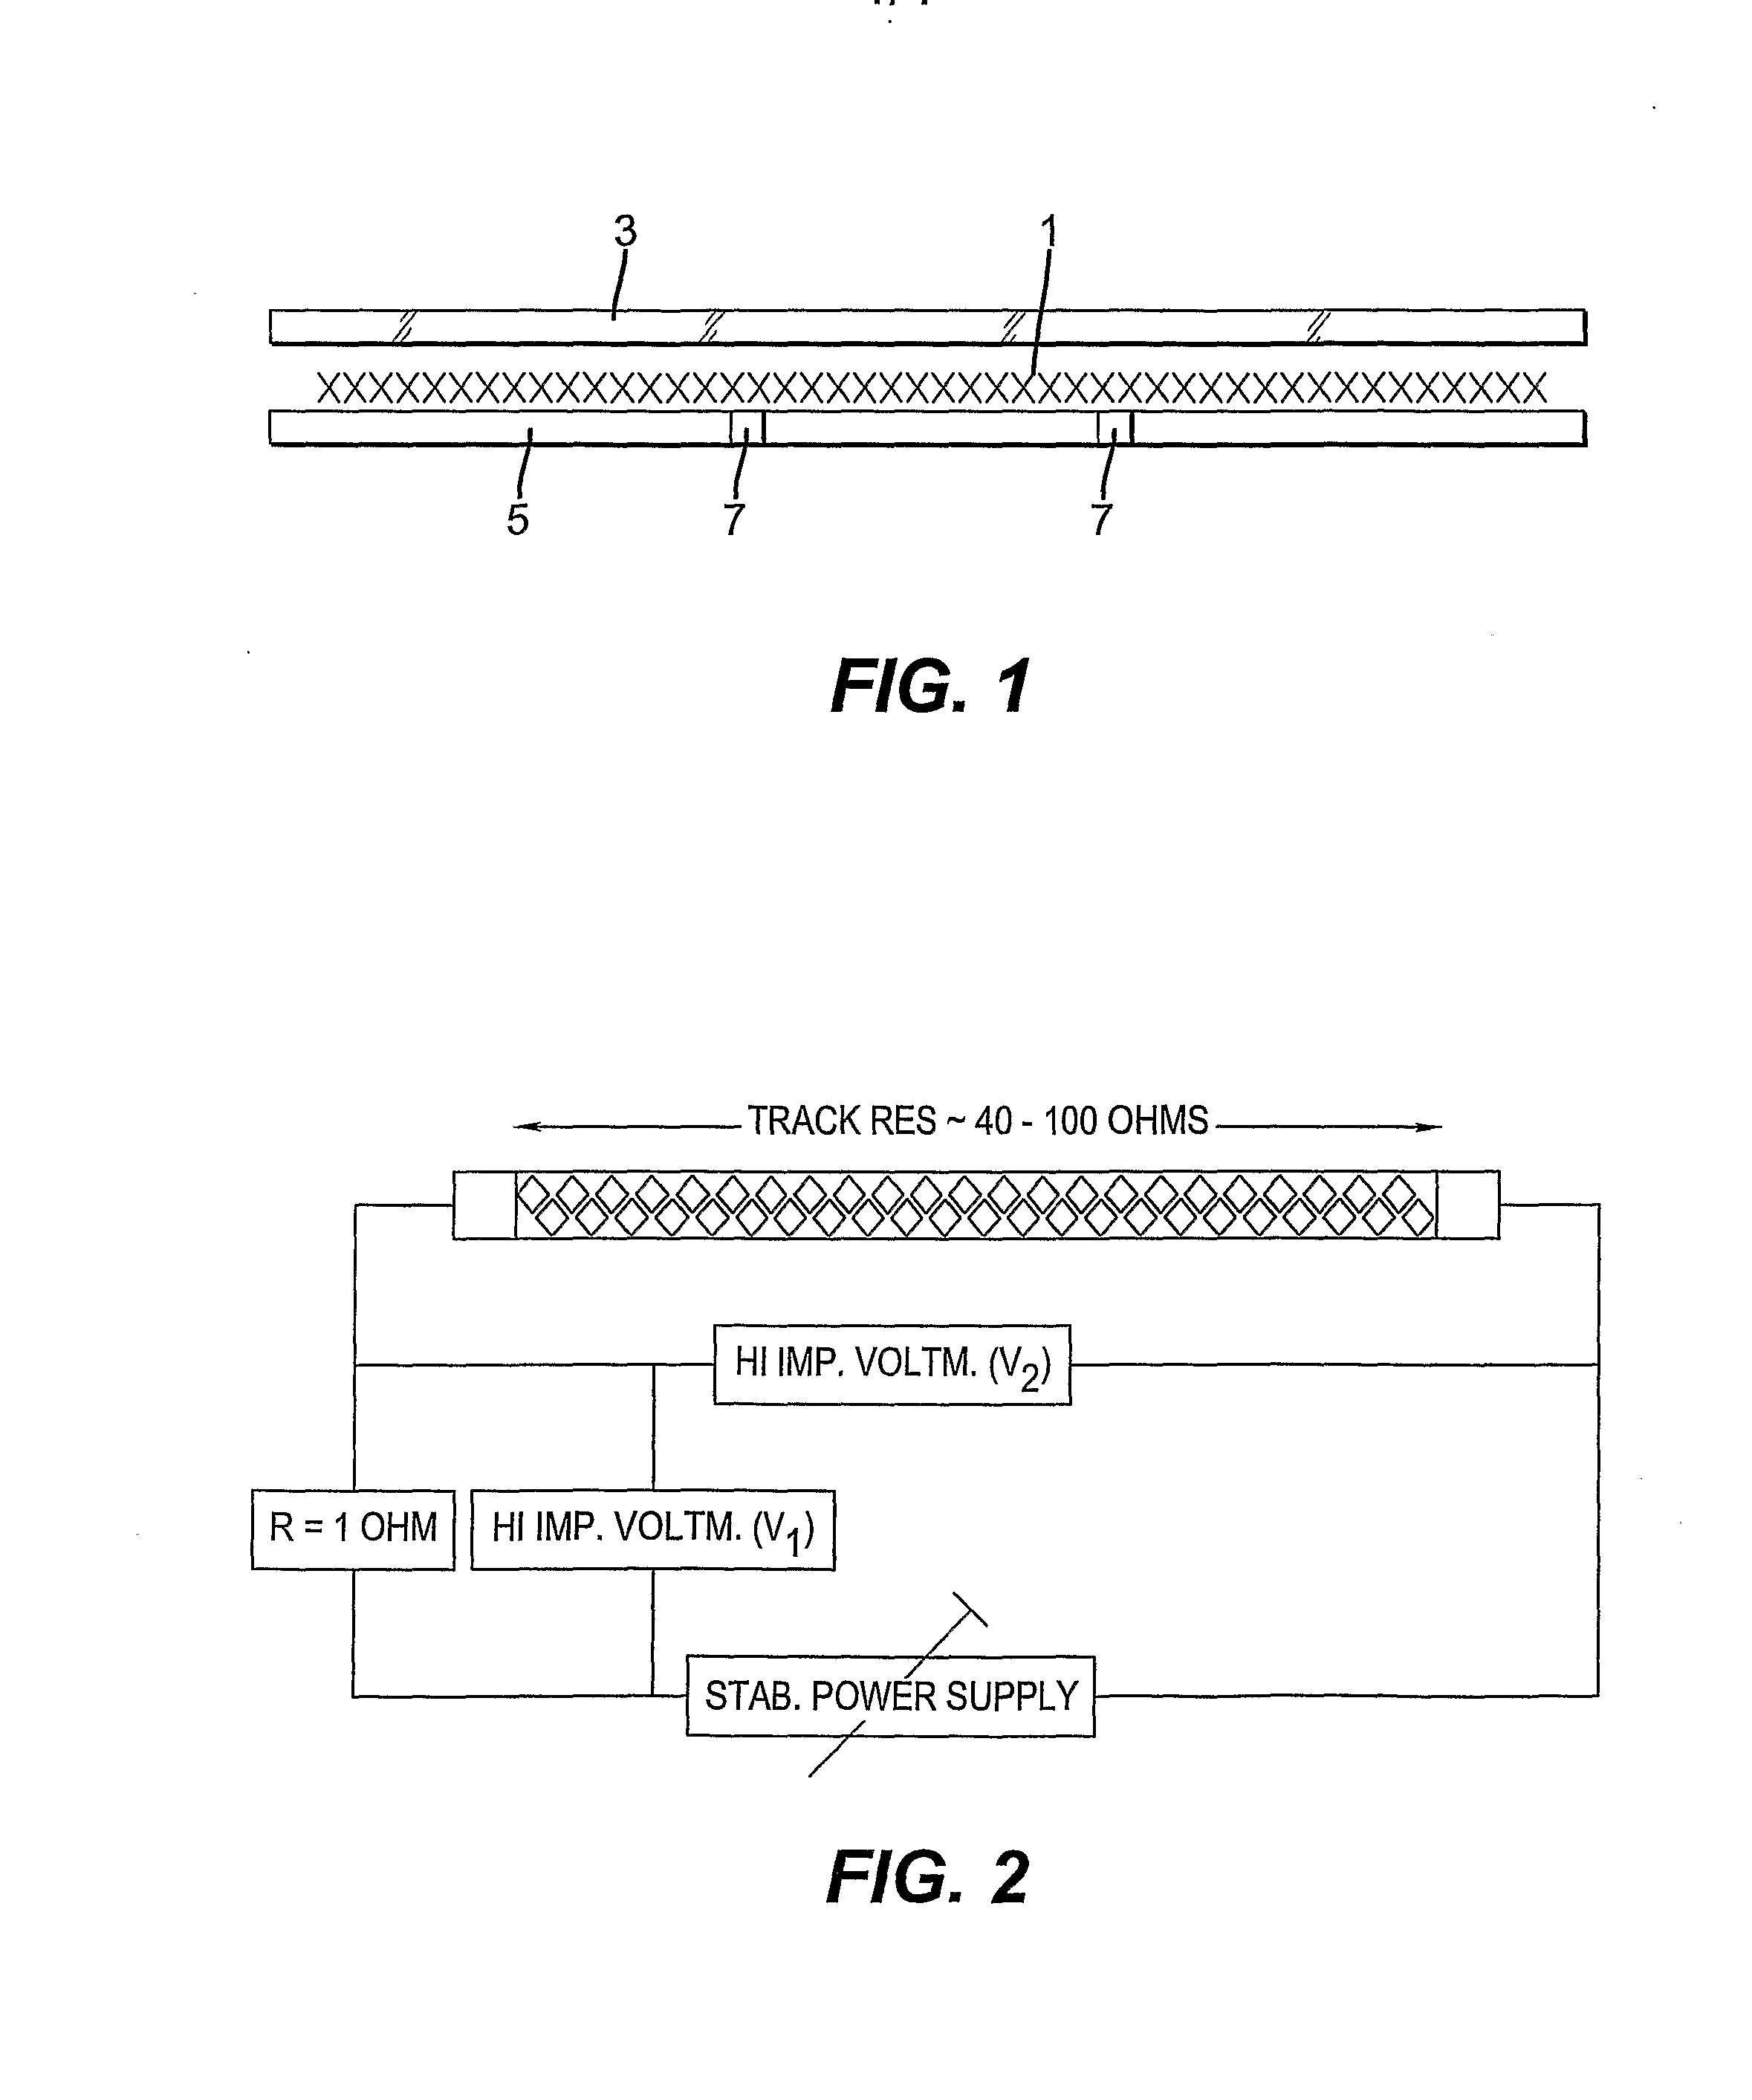 Method of Forming a Flexible Heating Element